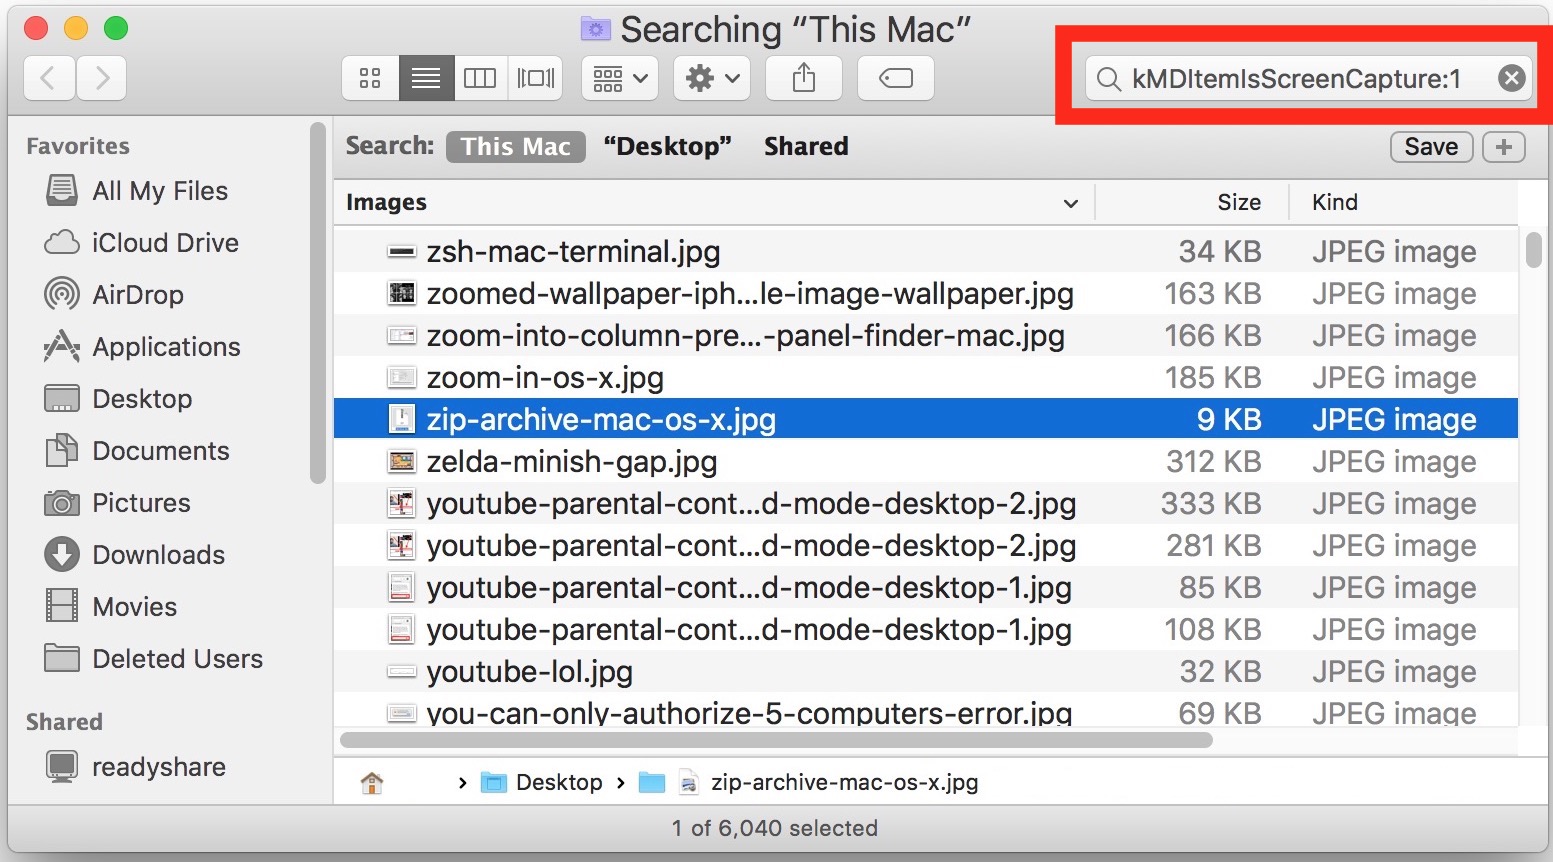 how i can search for files changed on a certain day on a mac